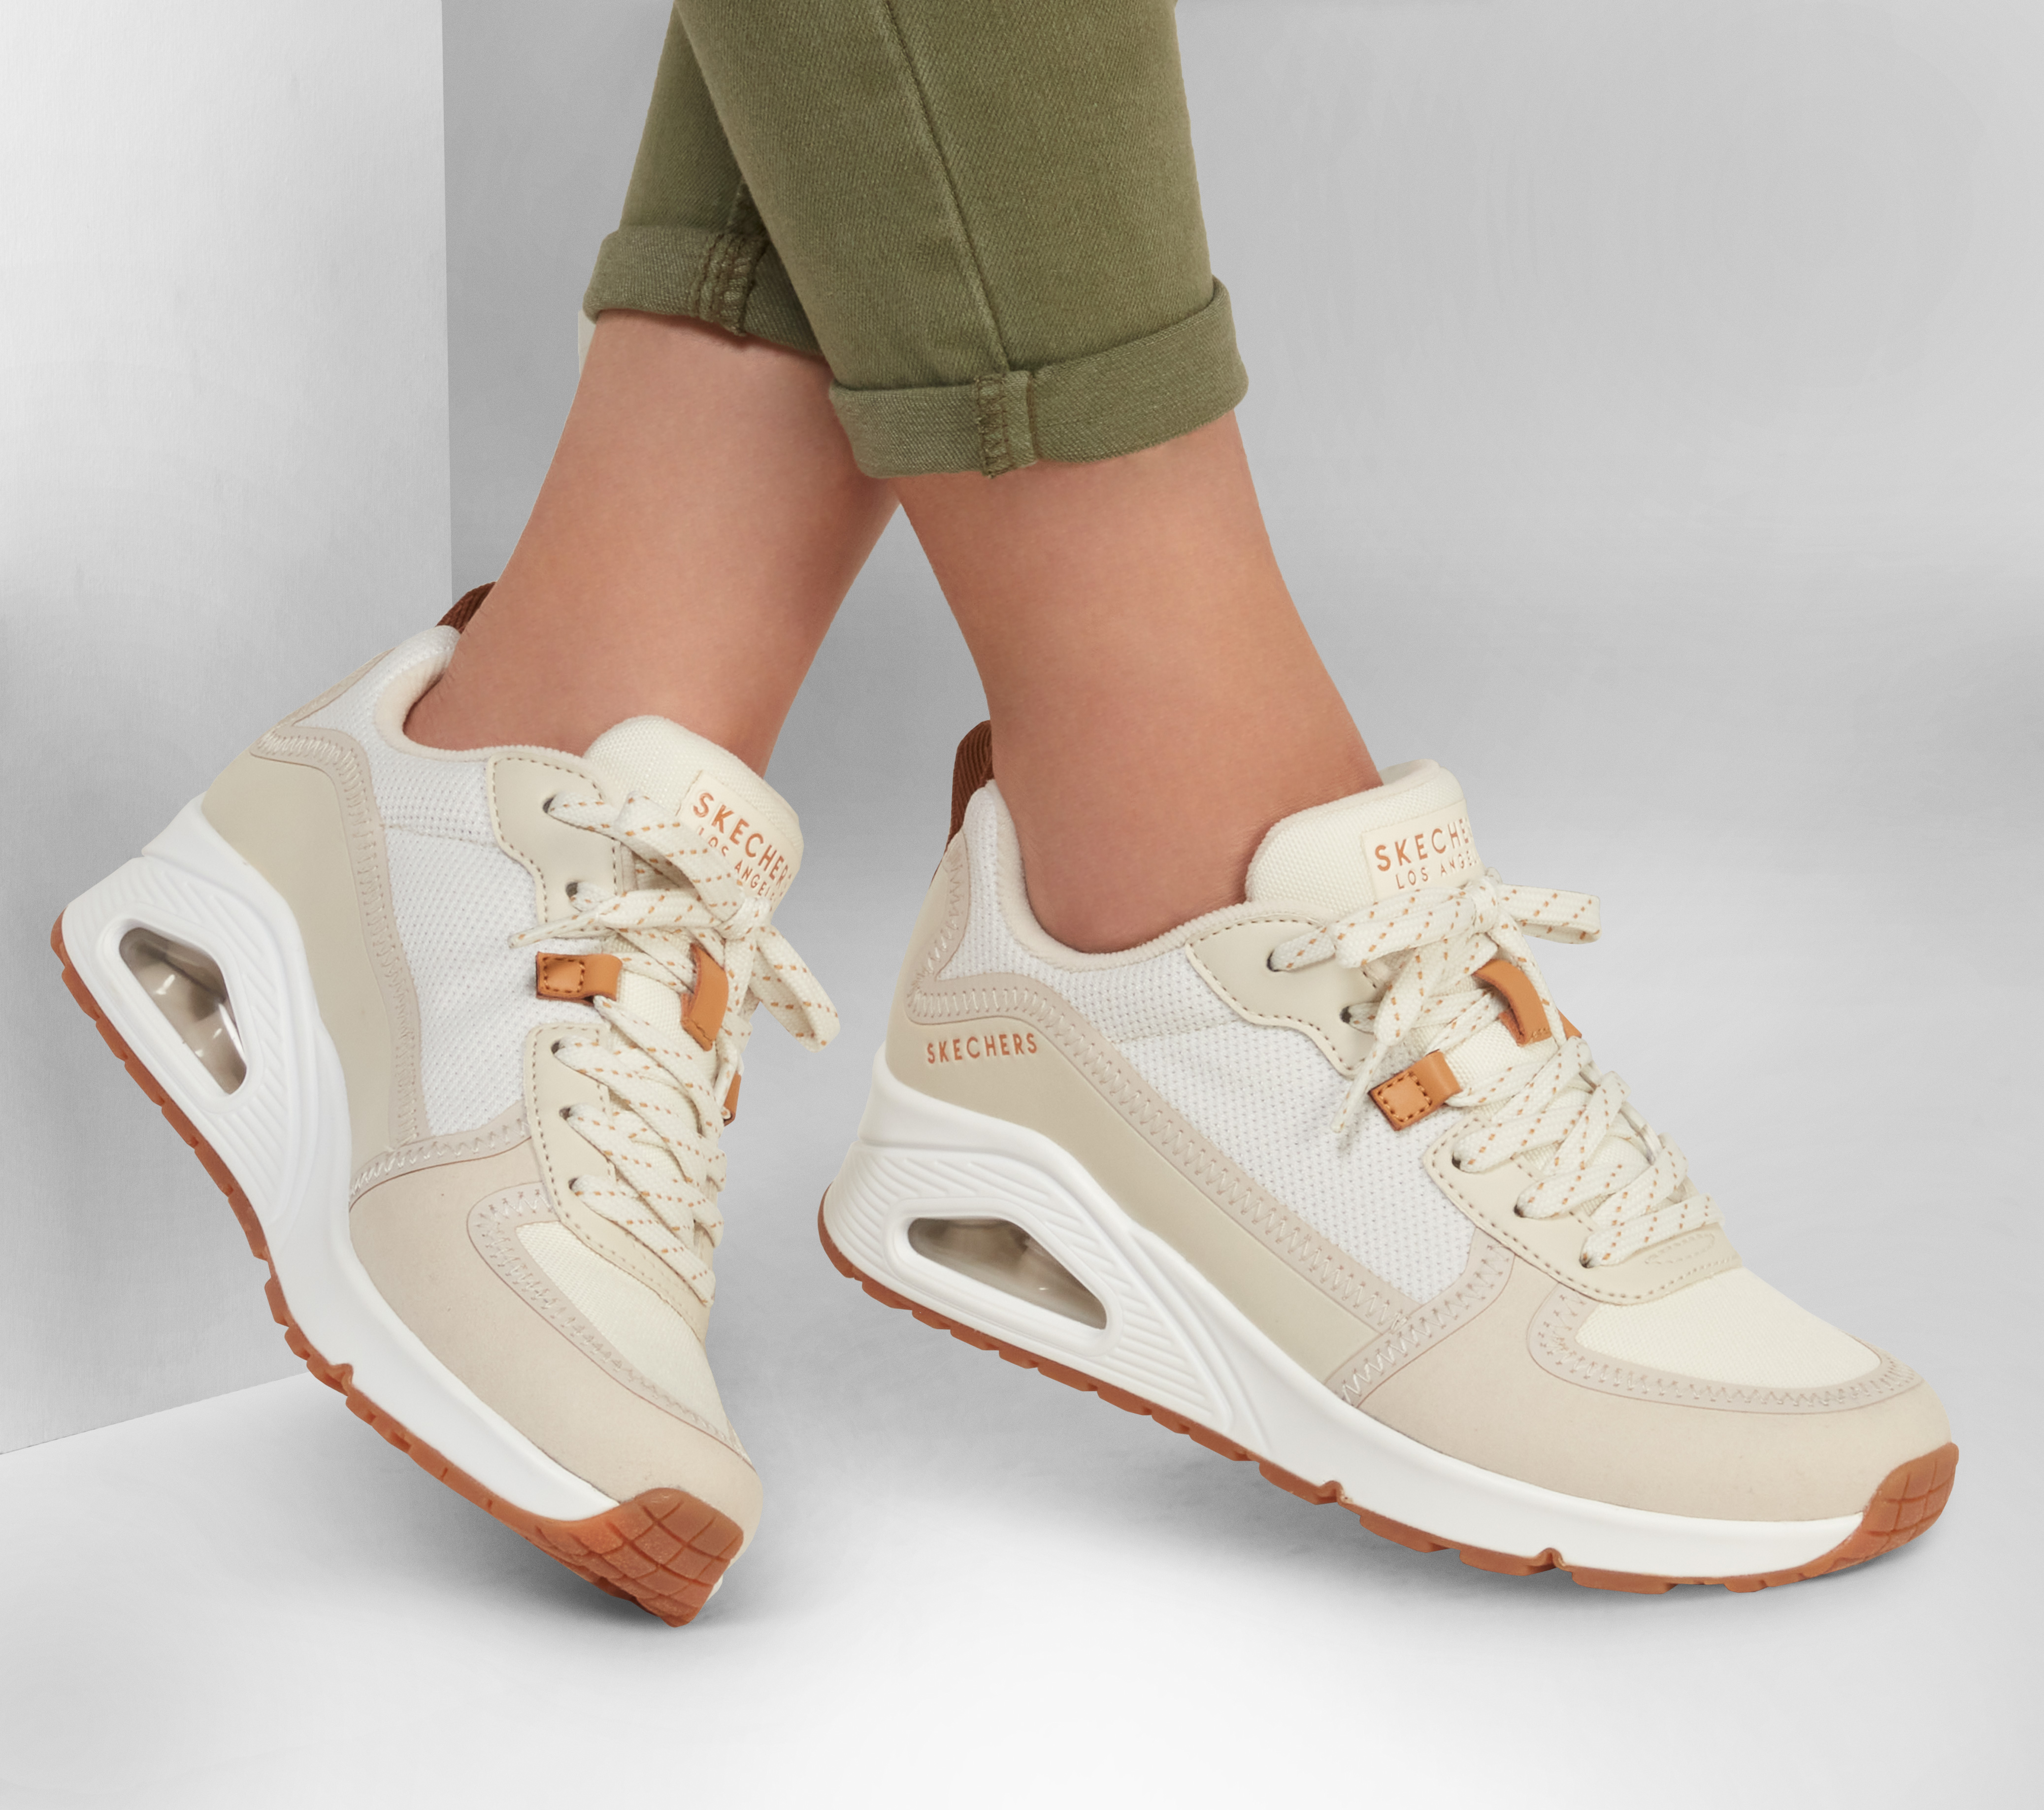 SKECHERS - SKECHERS Uno - Layover : Set the tone to styled